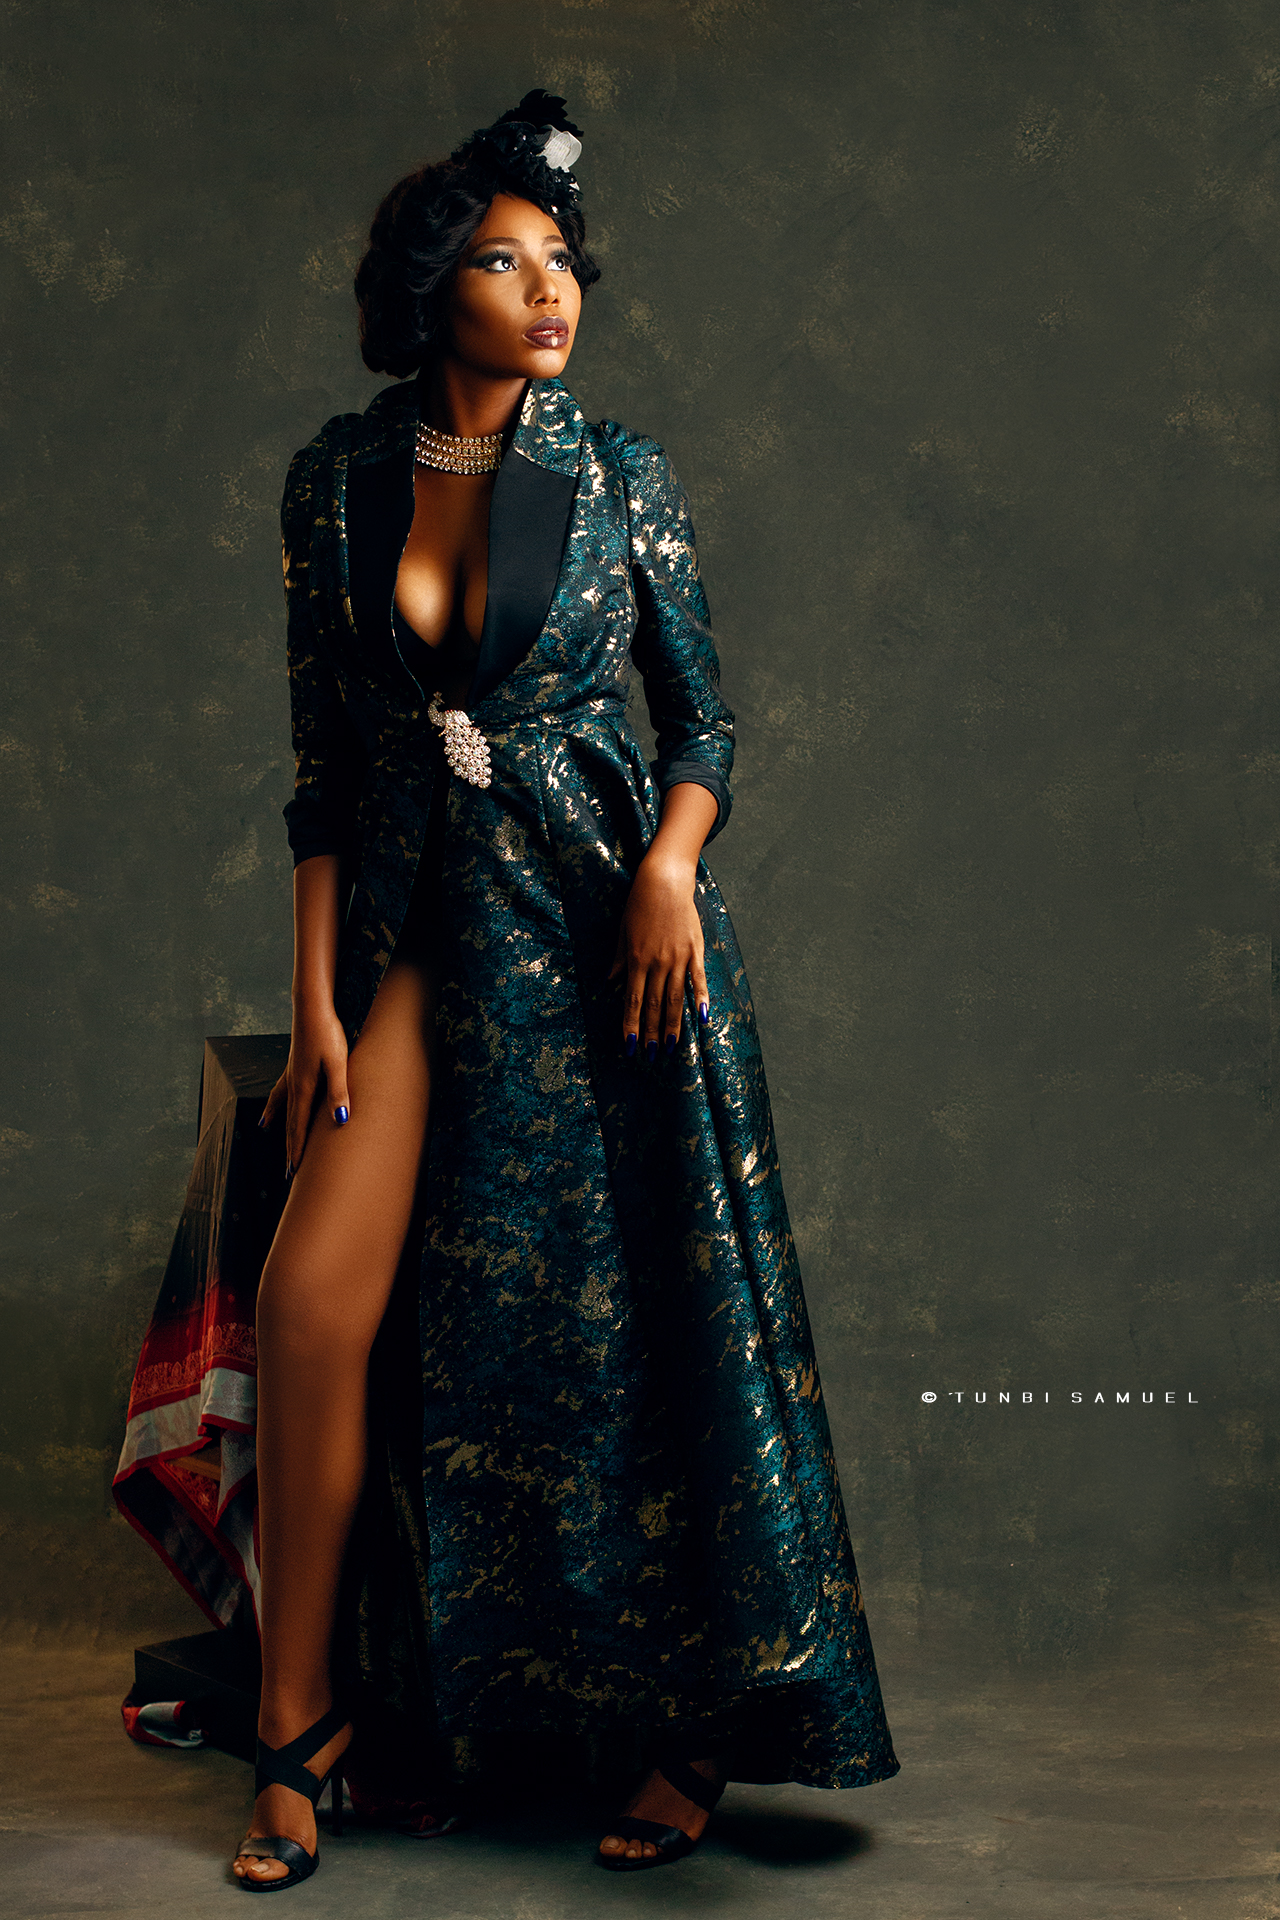 Karolyne Ashley’s Collaboration With Pro Model Africa Is Gold